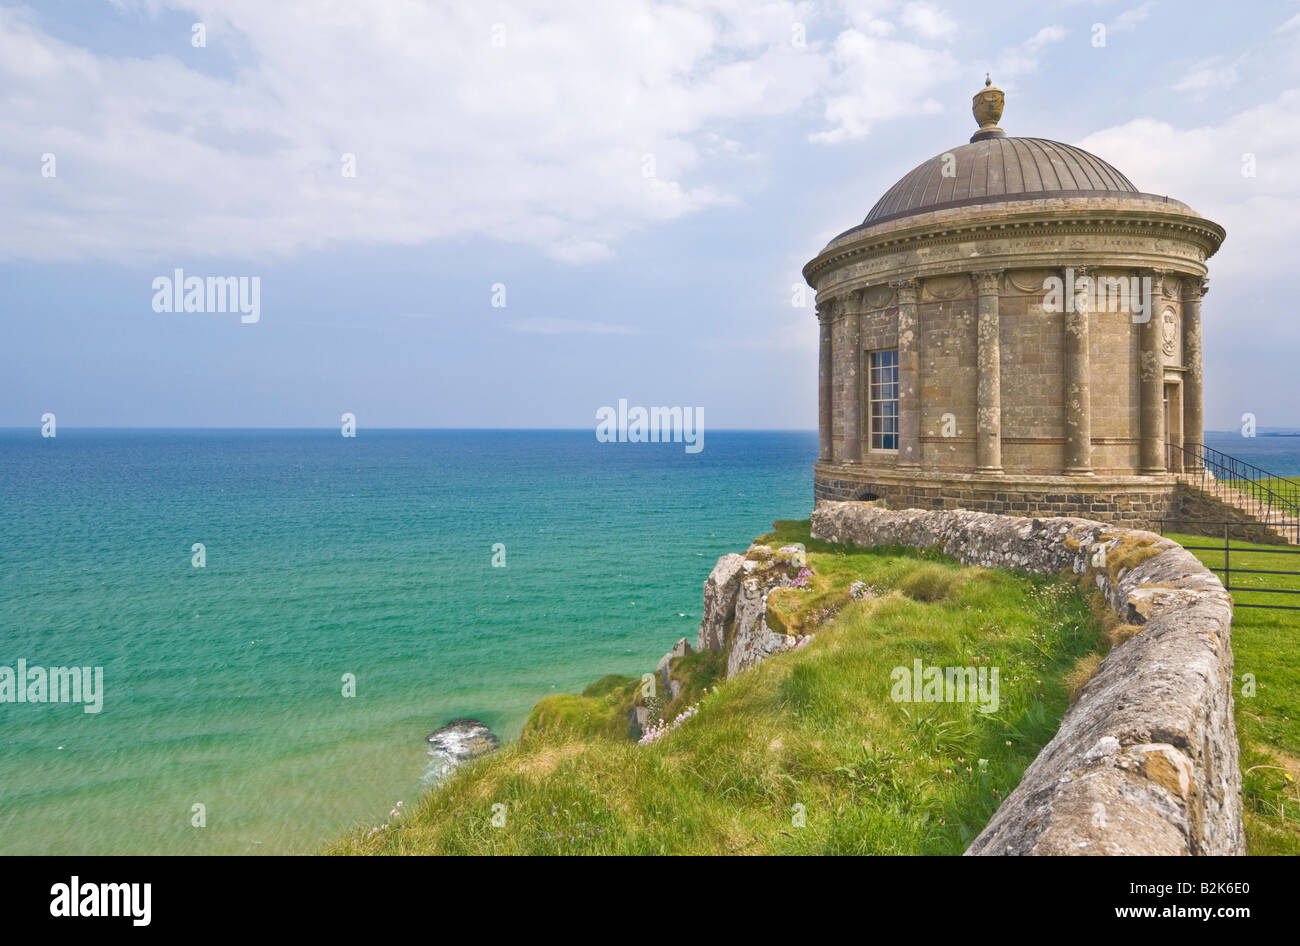 Mussenden temple on the clifftop Downhill estate County Londonderry Northern Ireland GB UK EU Europe Stock Photo